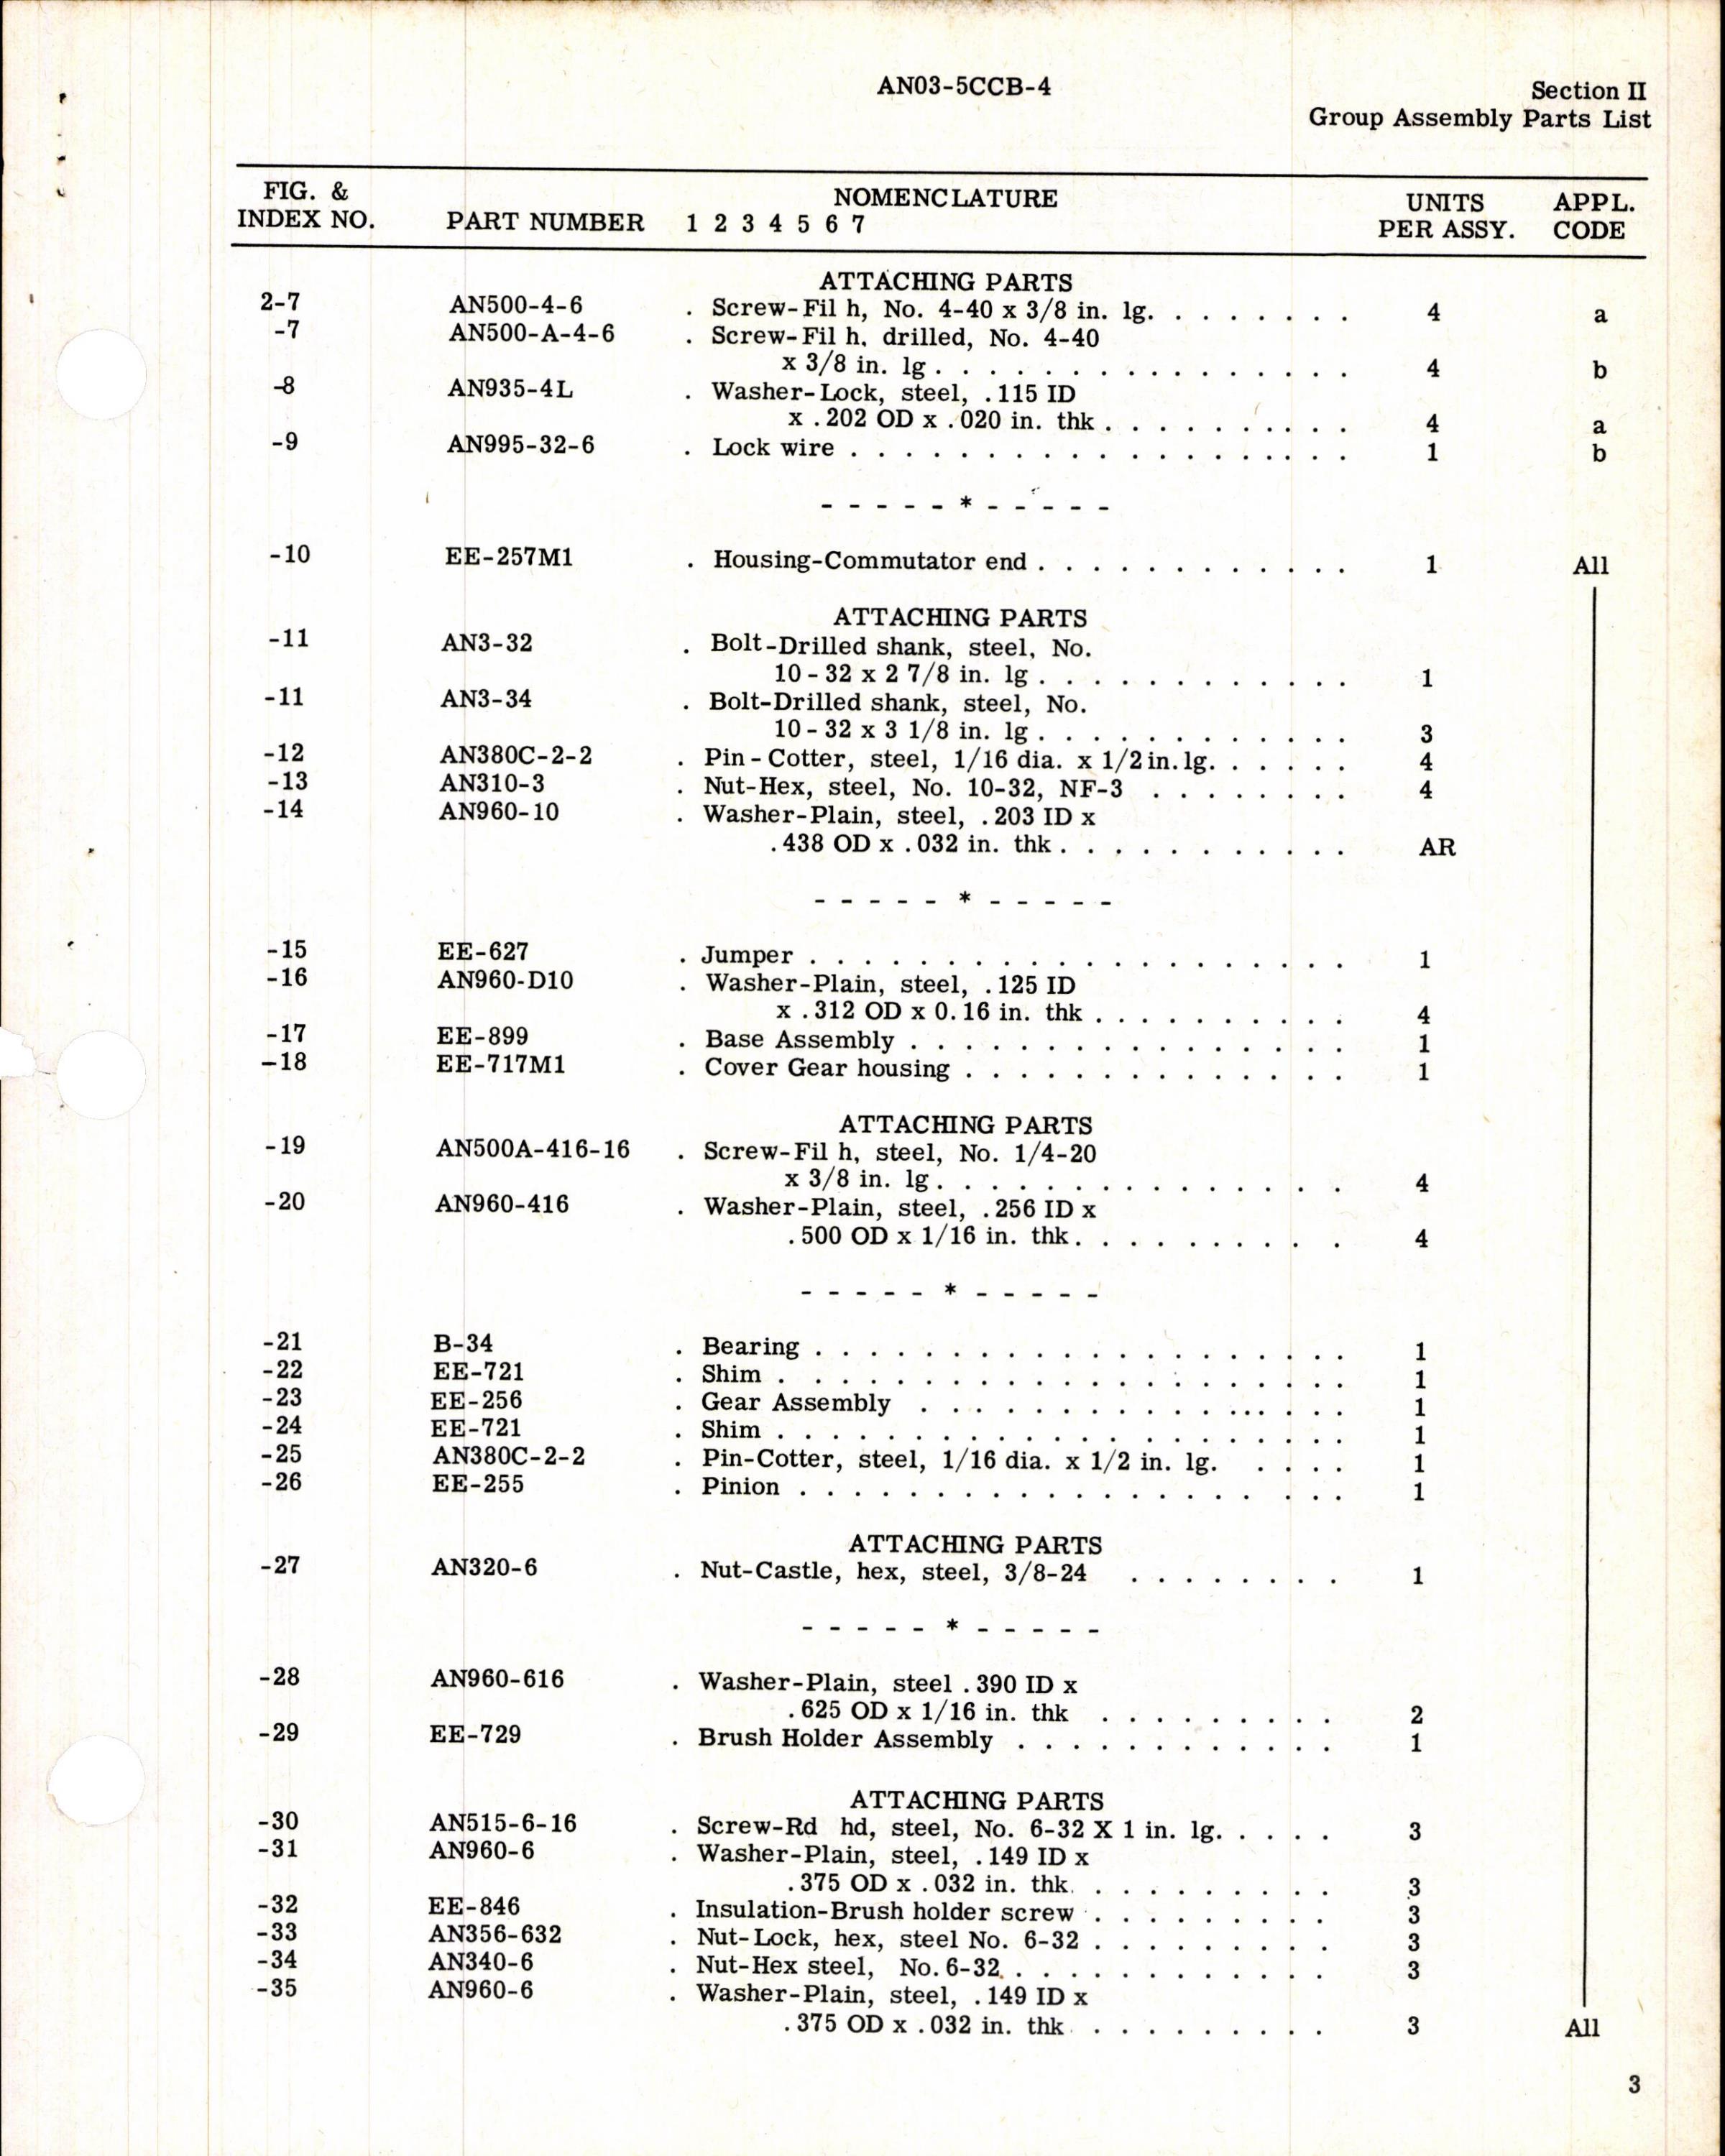 Sample page 7 from AirCorps Library document: Parts Catalog and Overhaul Instructions for Air Associates Electric Motors